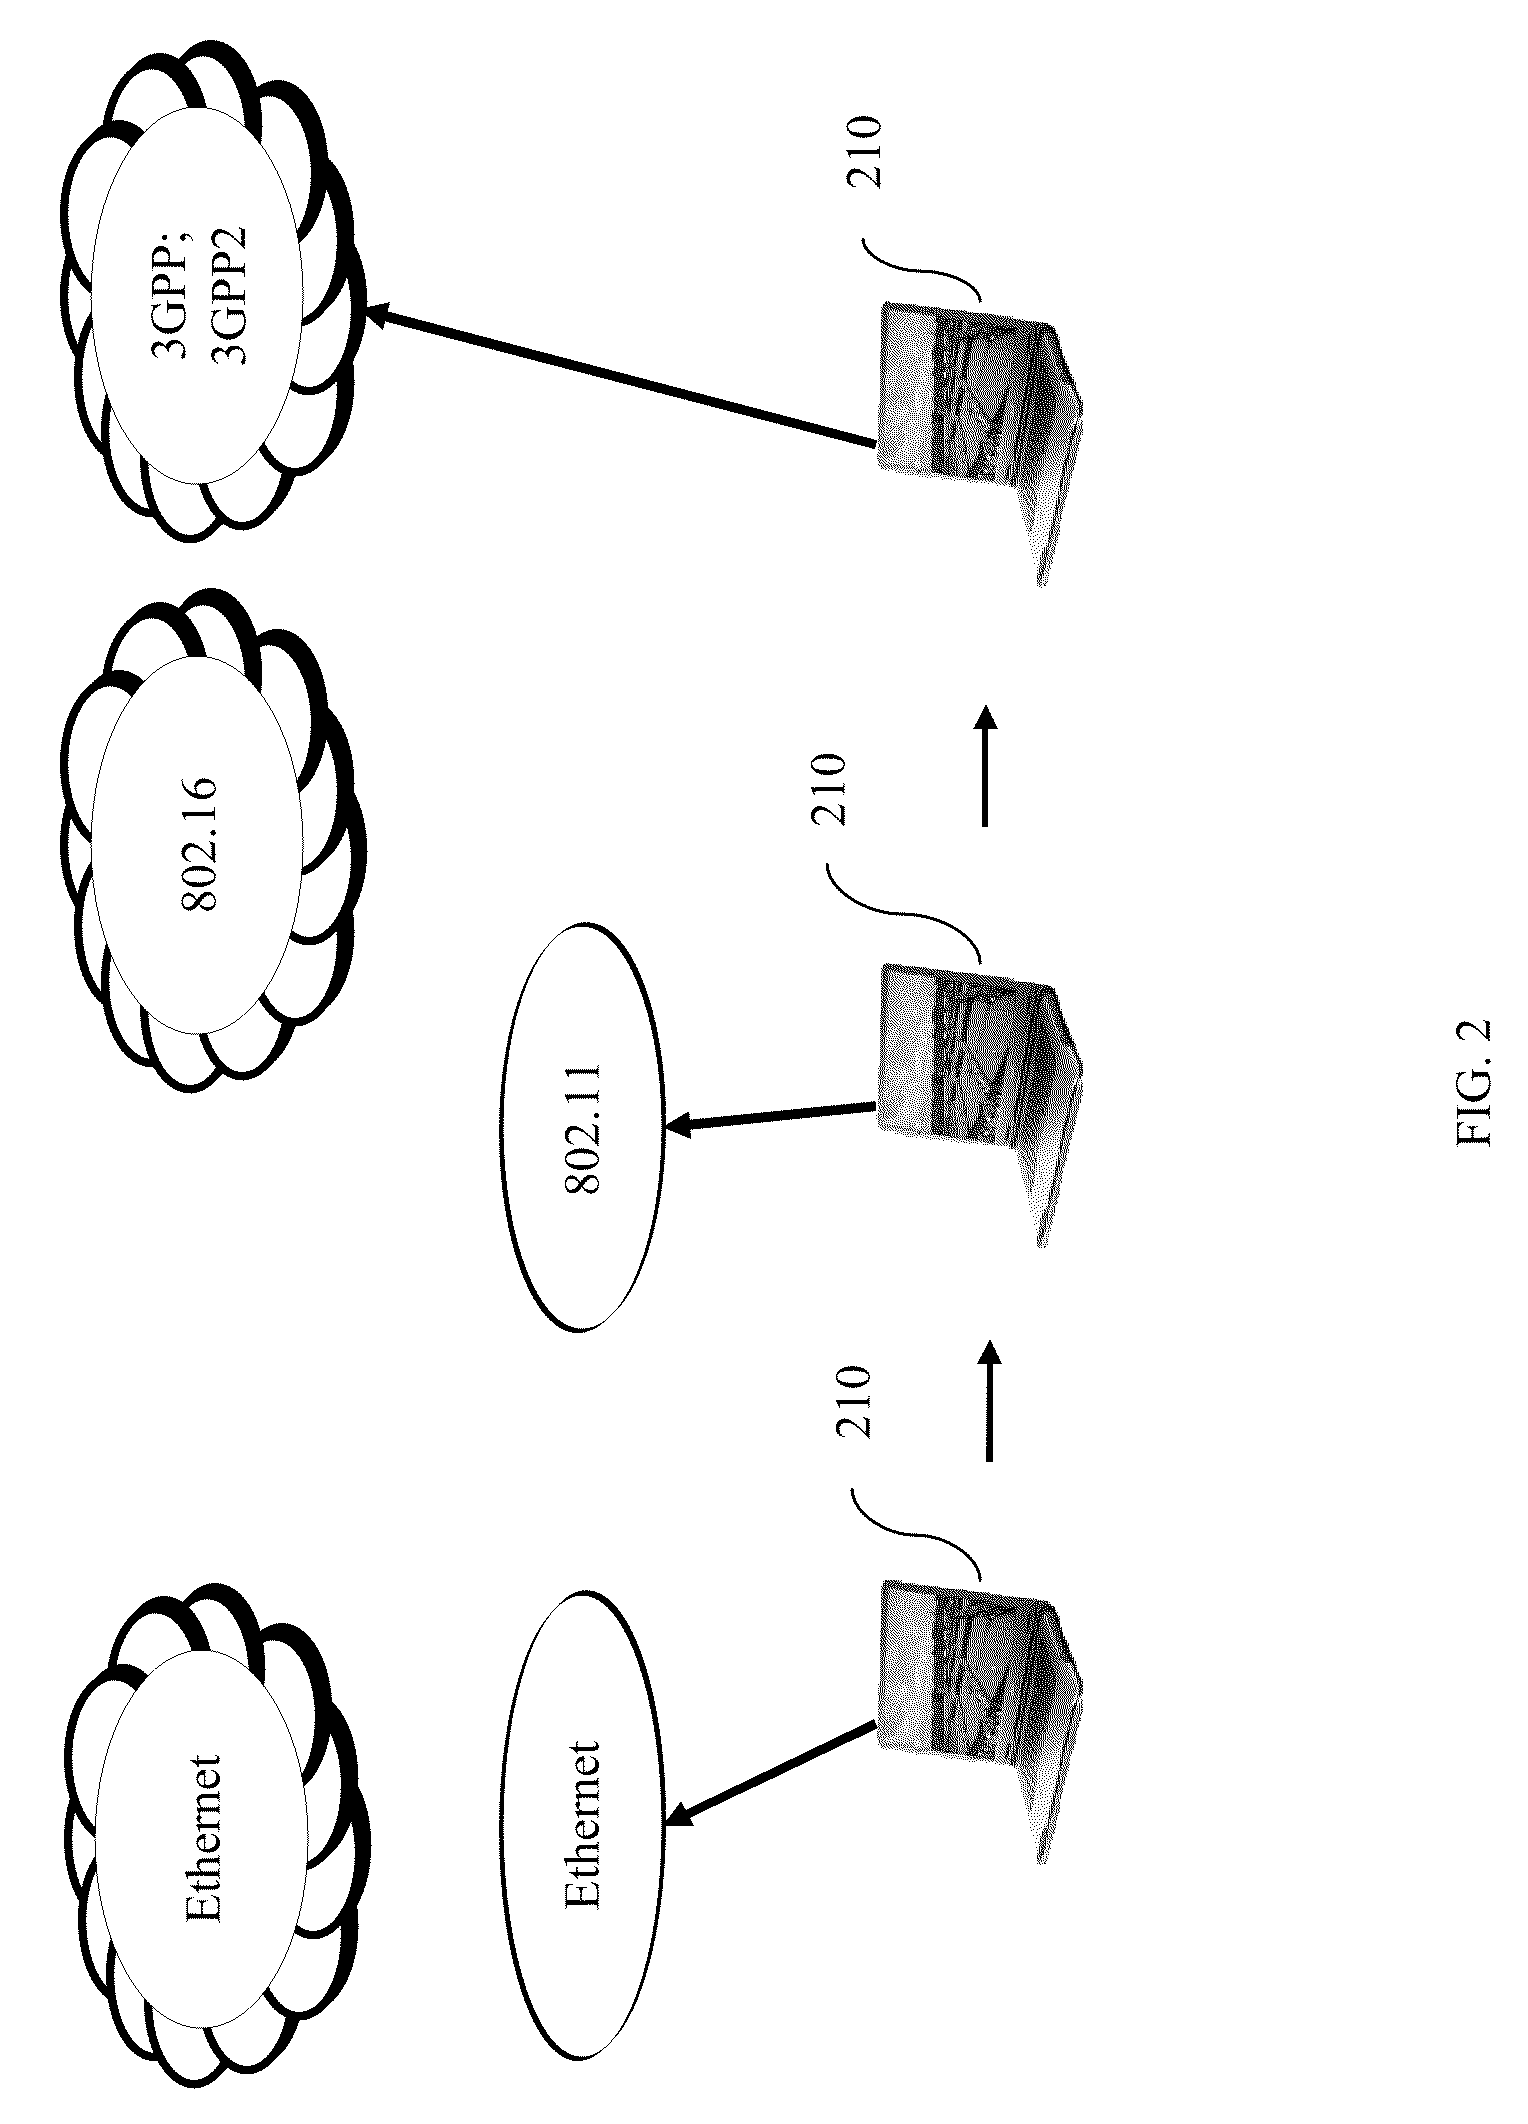 Method for supporting paging and deep sleep with multiple radio interfaces